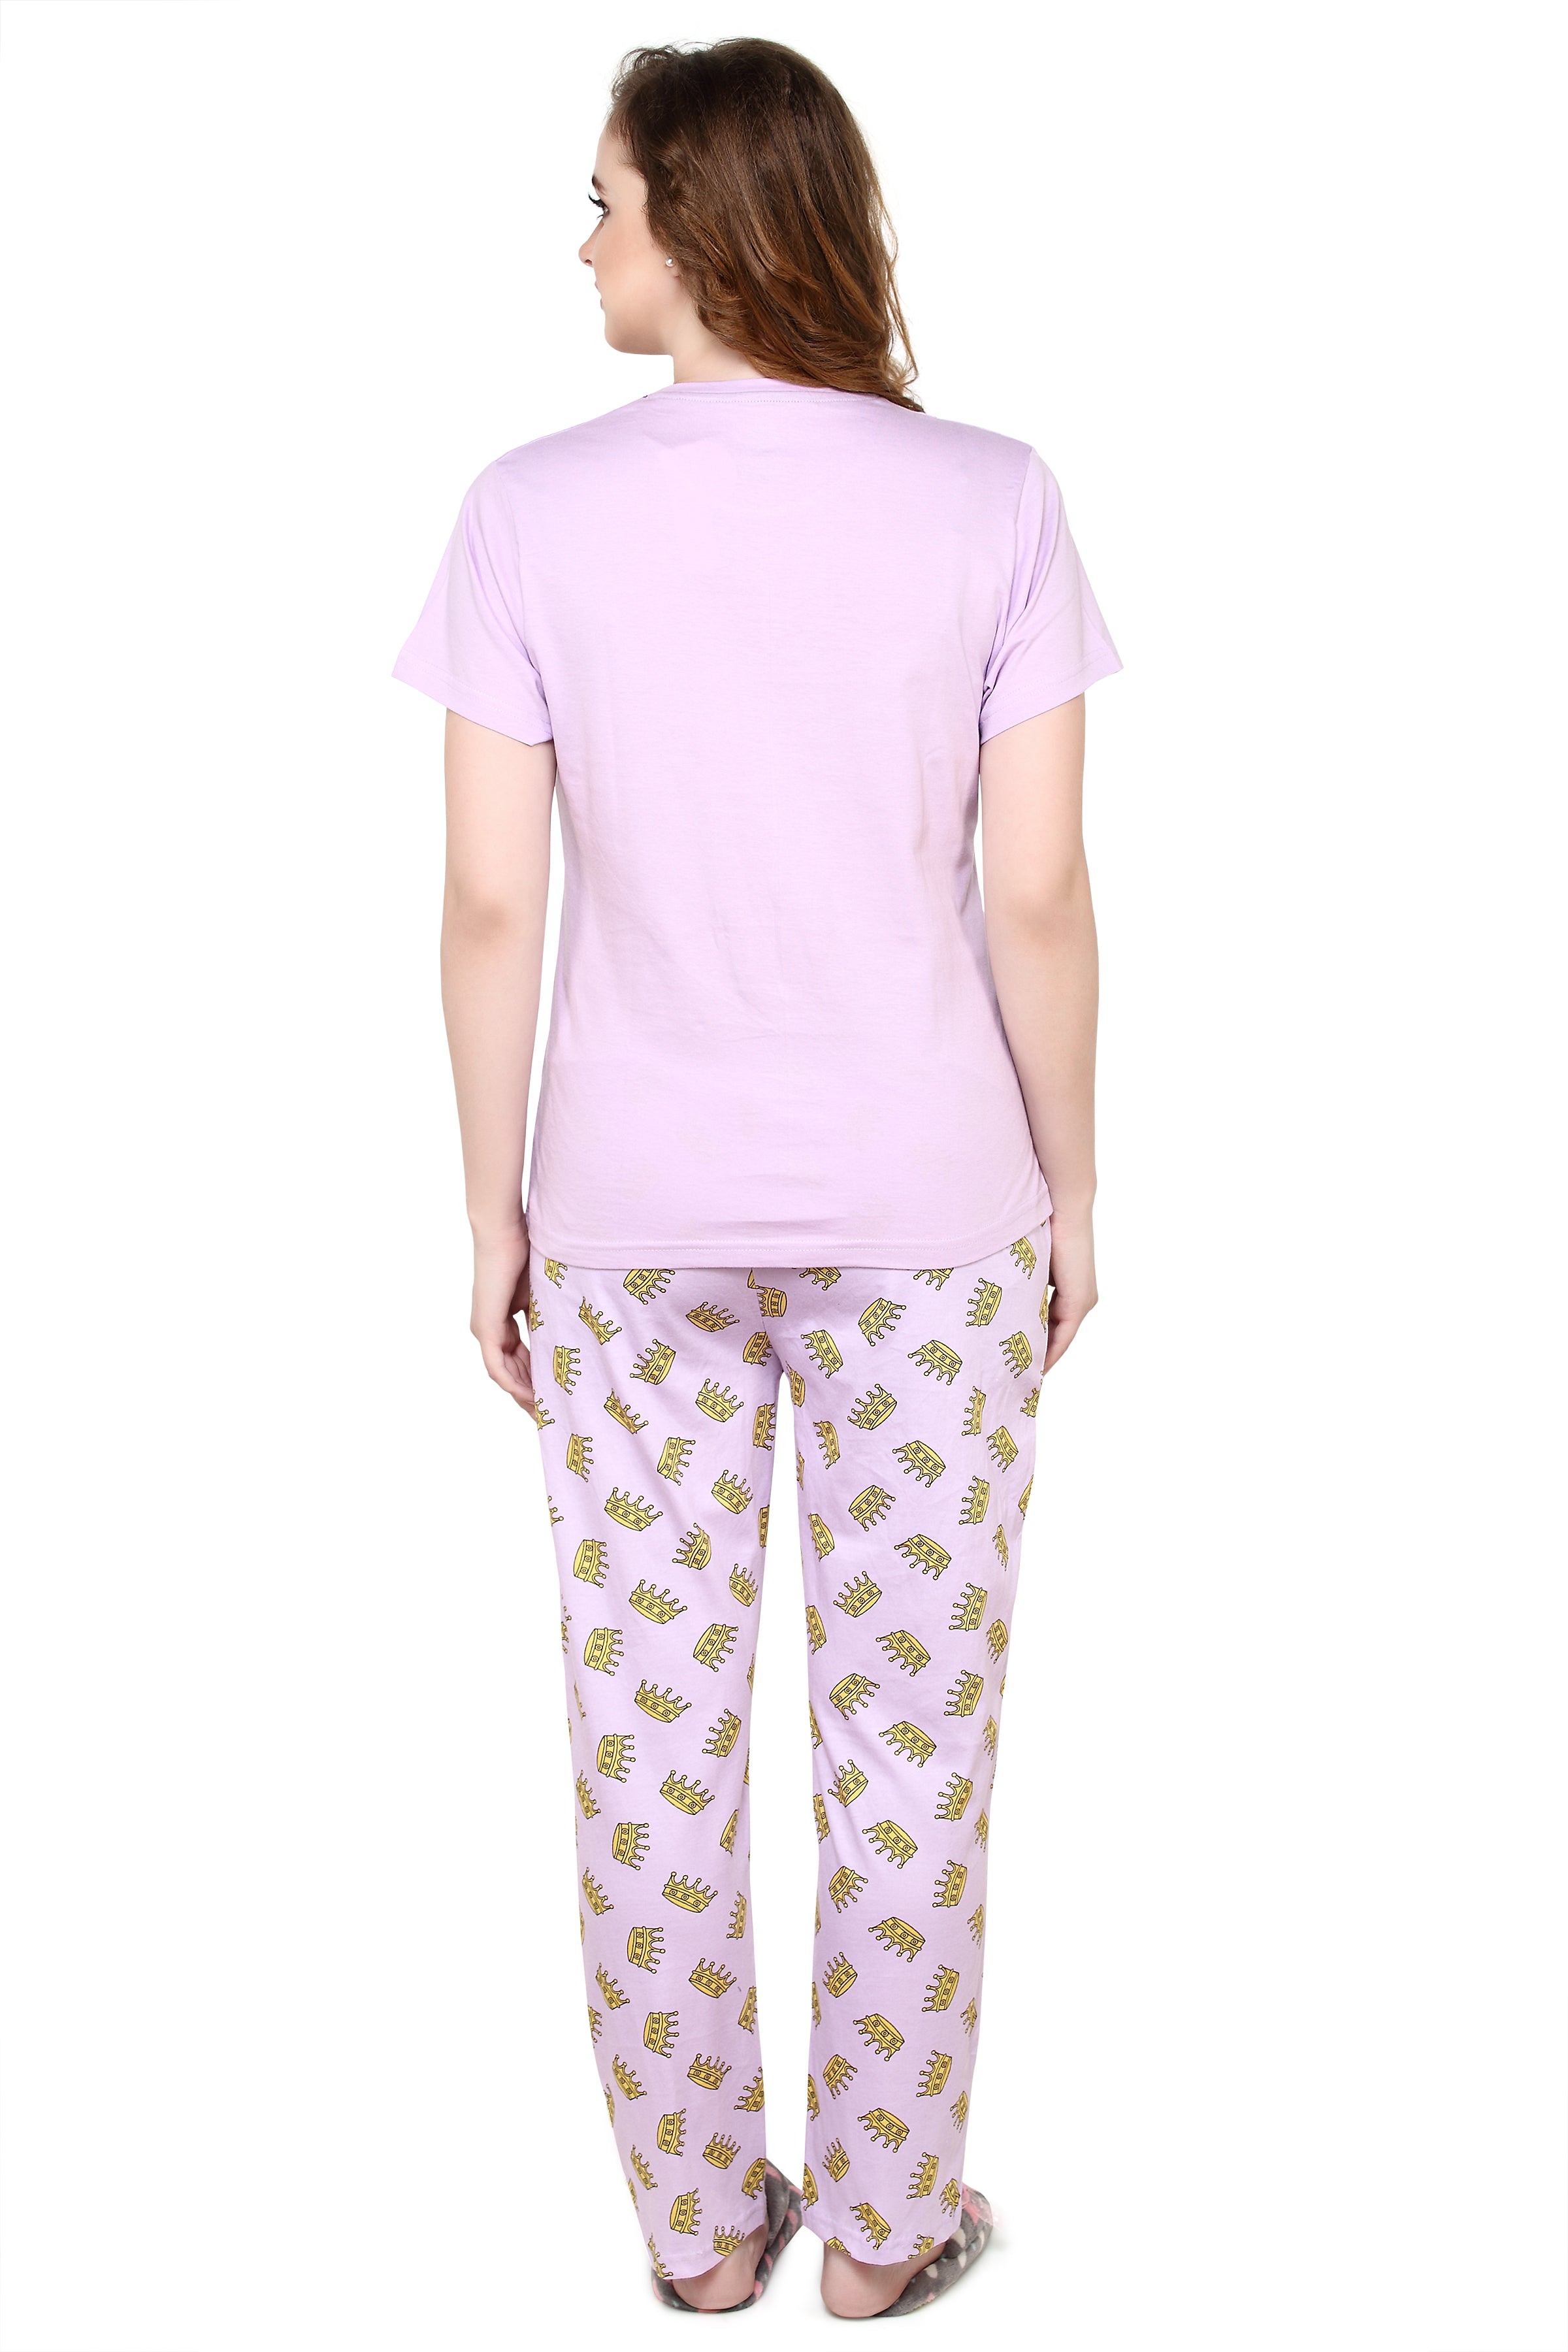 evolove Lilac Sachet Round Neck Crown & Queen print Women's (Pajama set), (Lavender), M Get free eyemask inside of any design